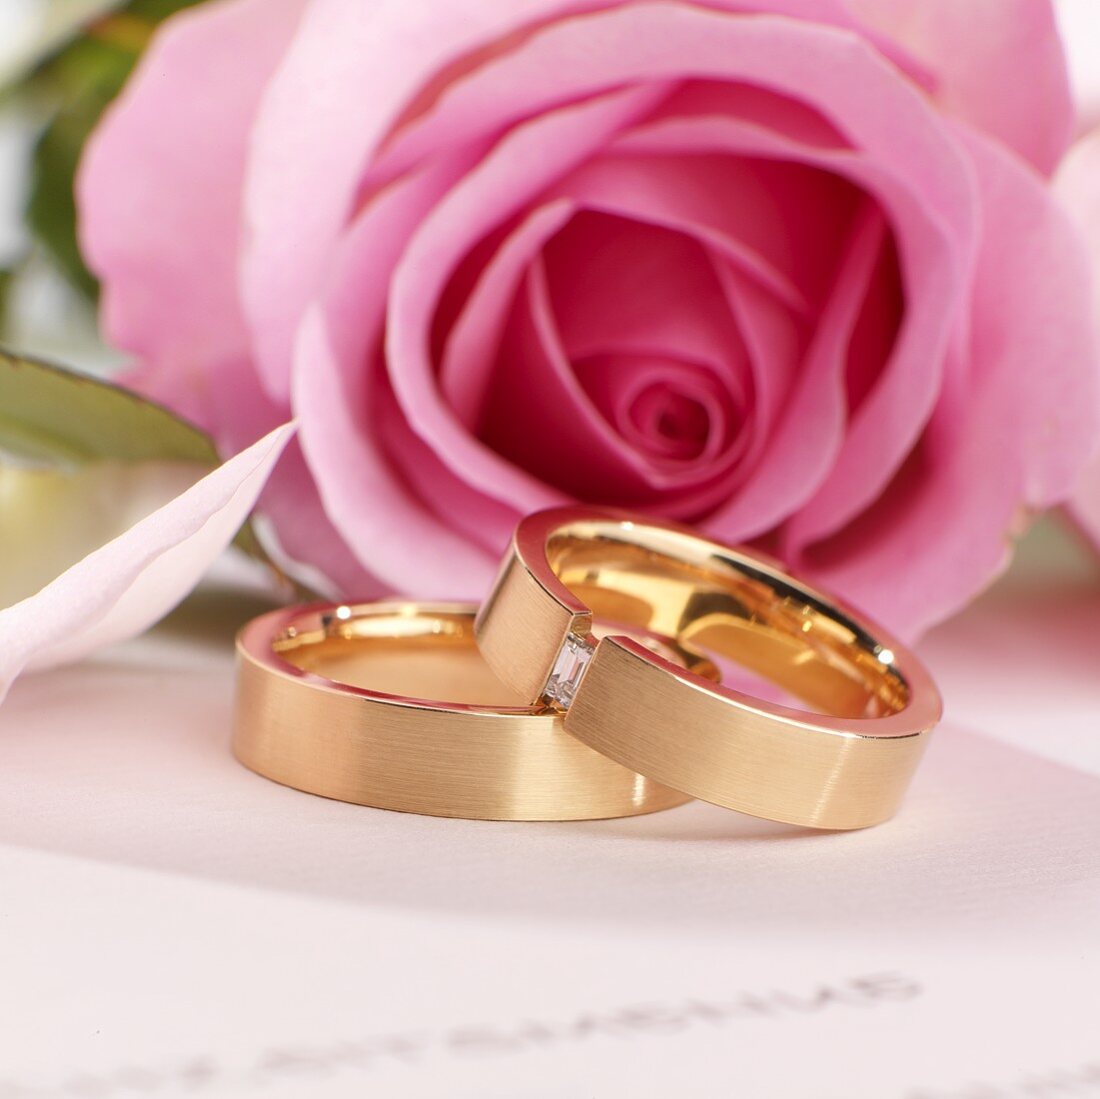 Wedding rings in front of pink rose